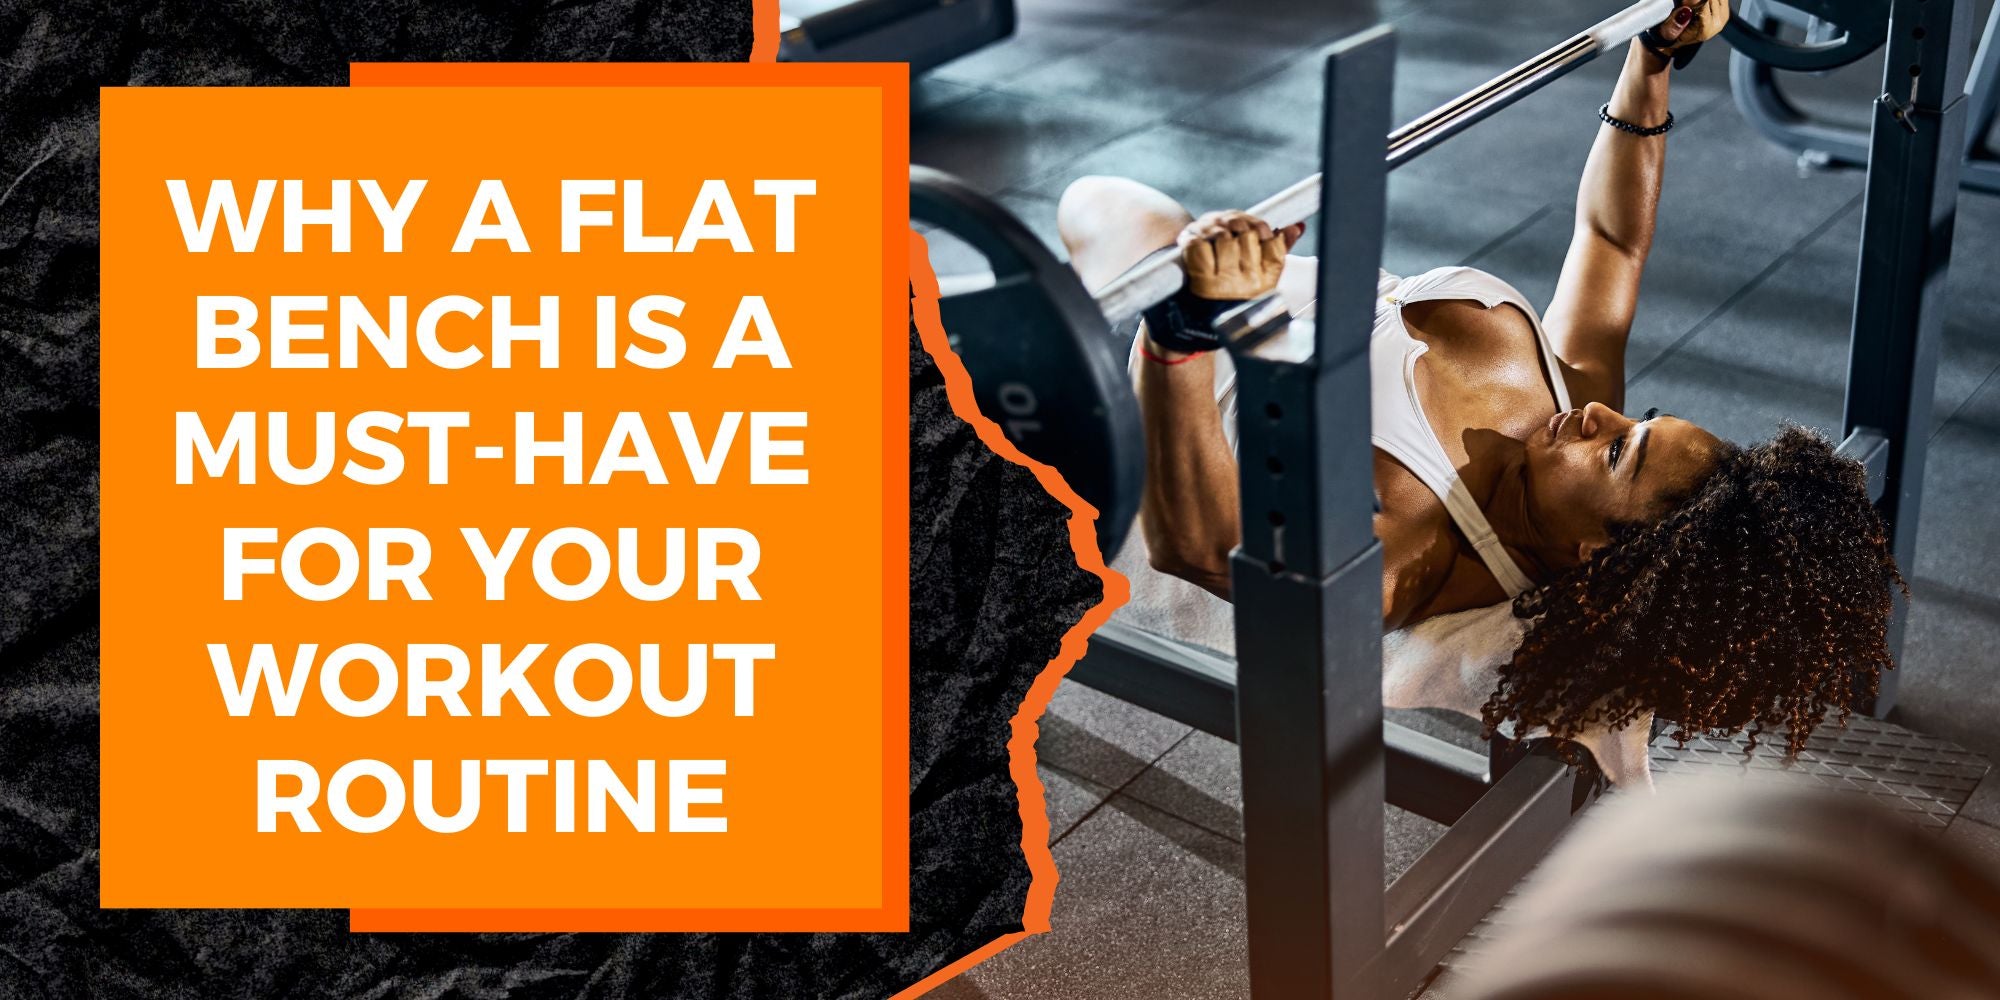 The Benefits of a Flat Bench